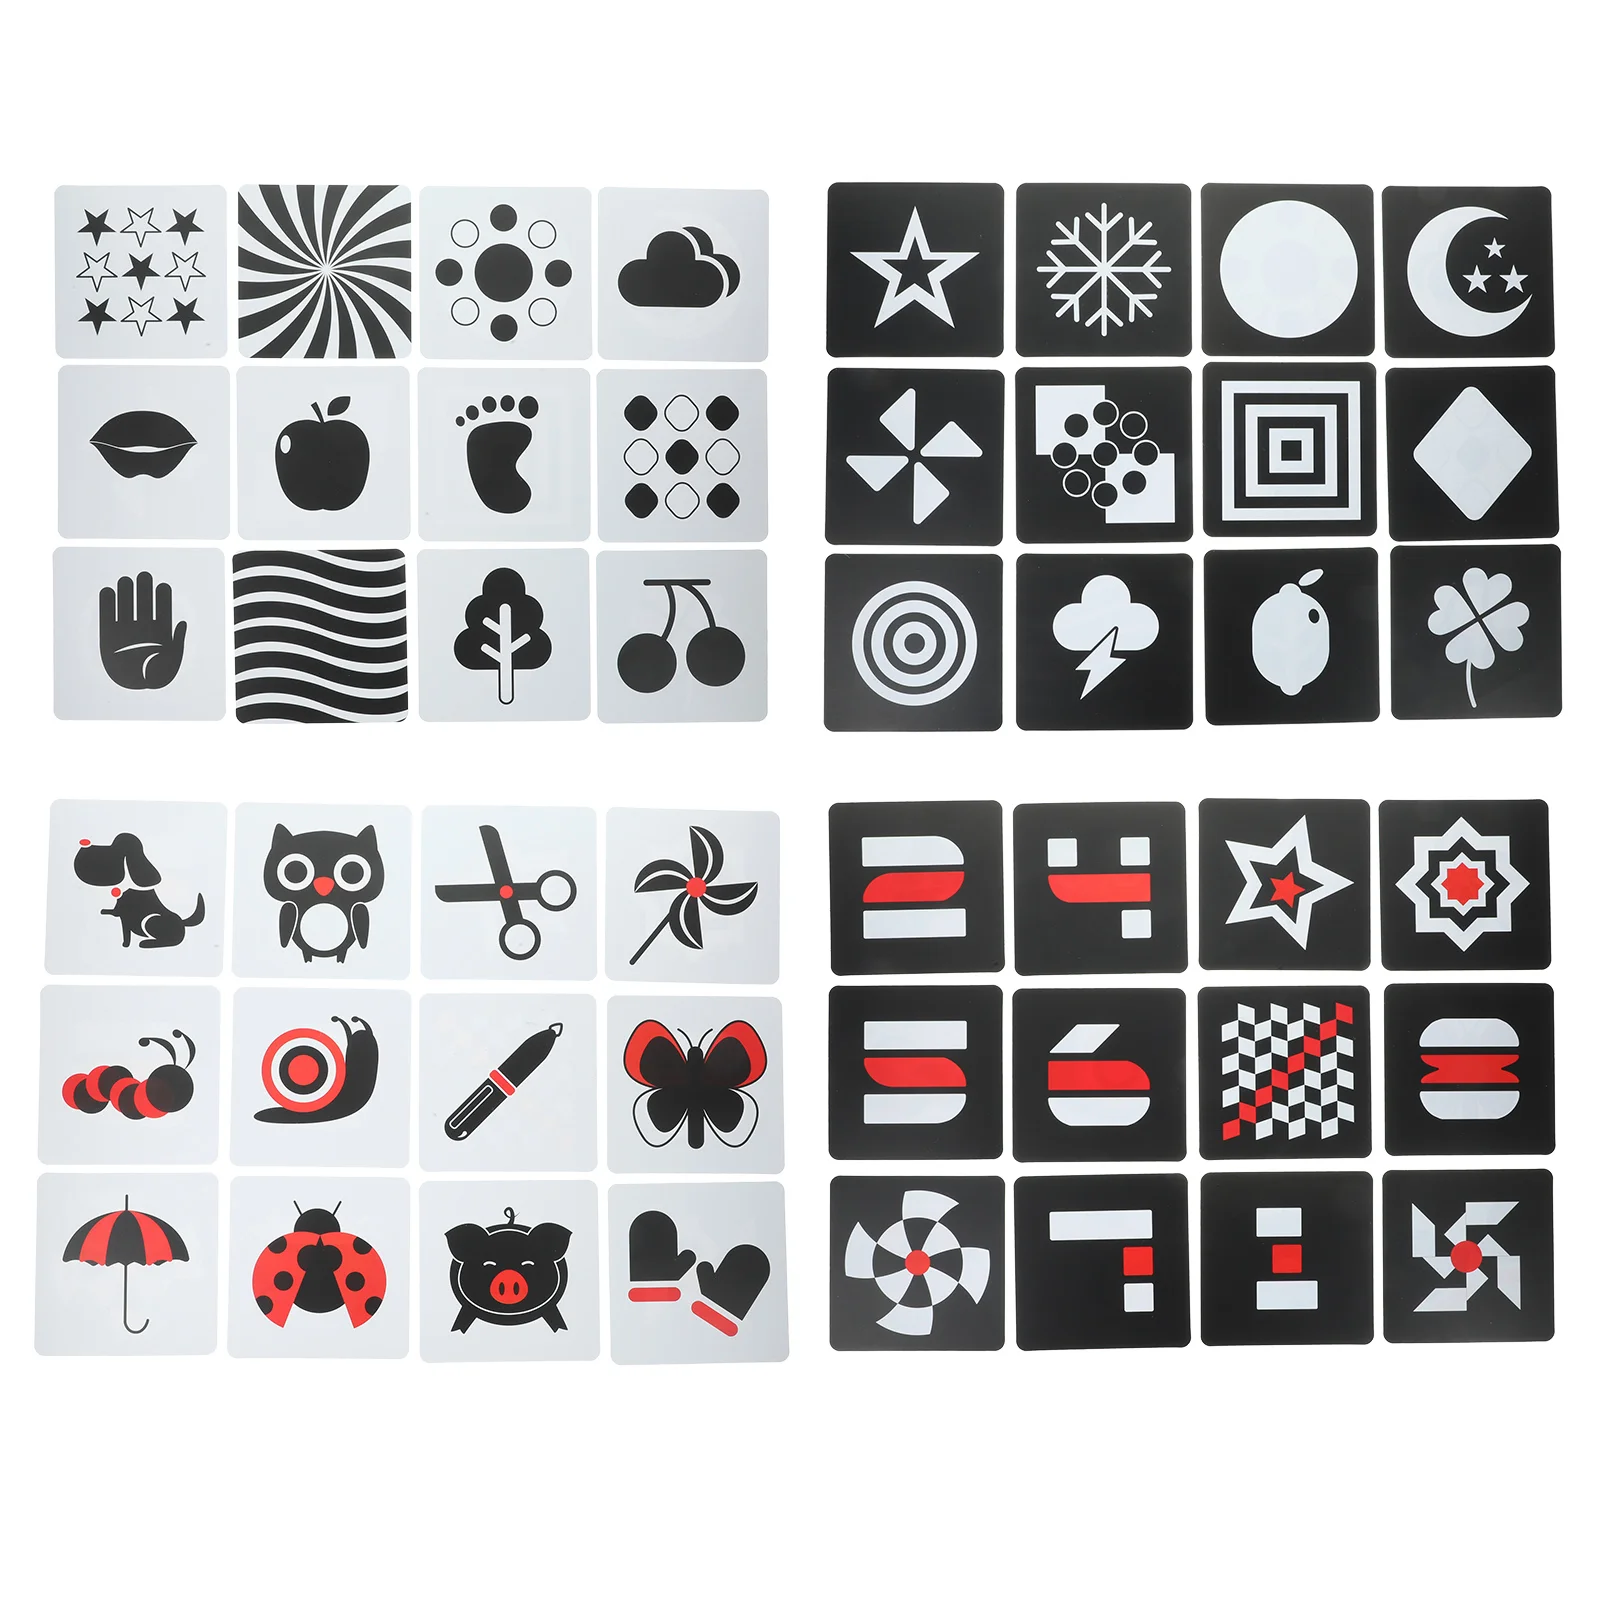 High Contrast Infant Toys Black White Visual Stimulation Cards Kids Activity Cards xiaomi bebird smart visual ear cleaner r1 black